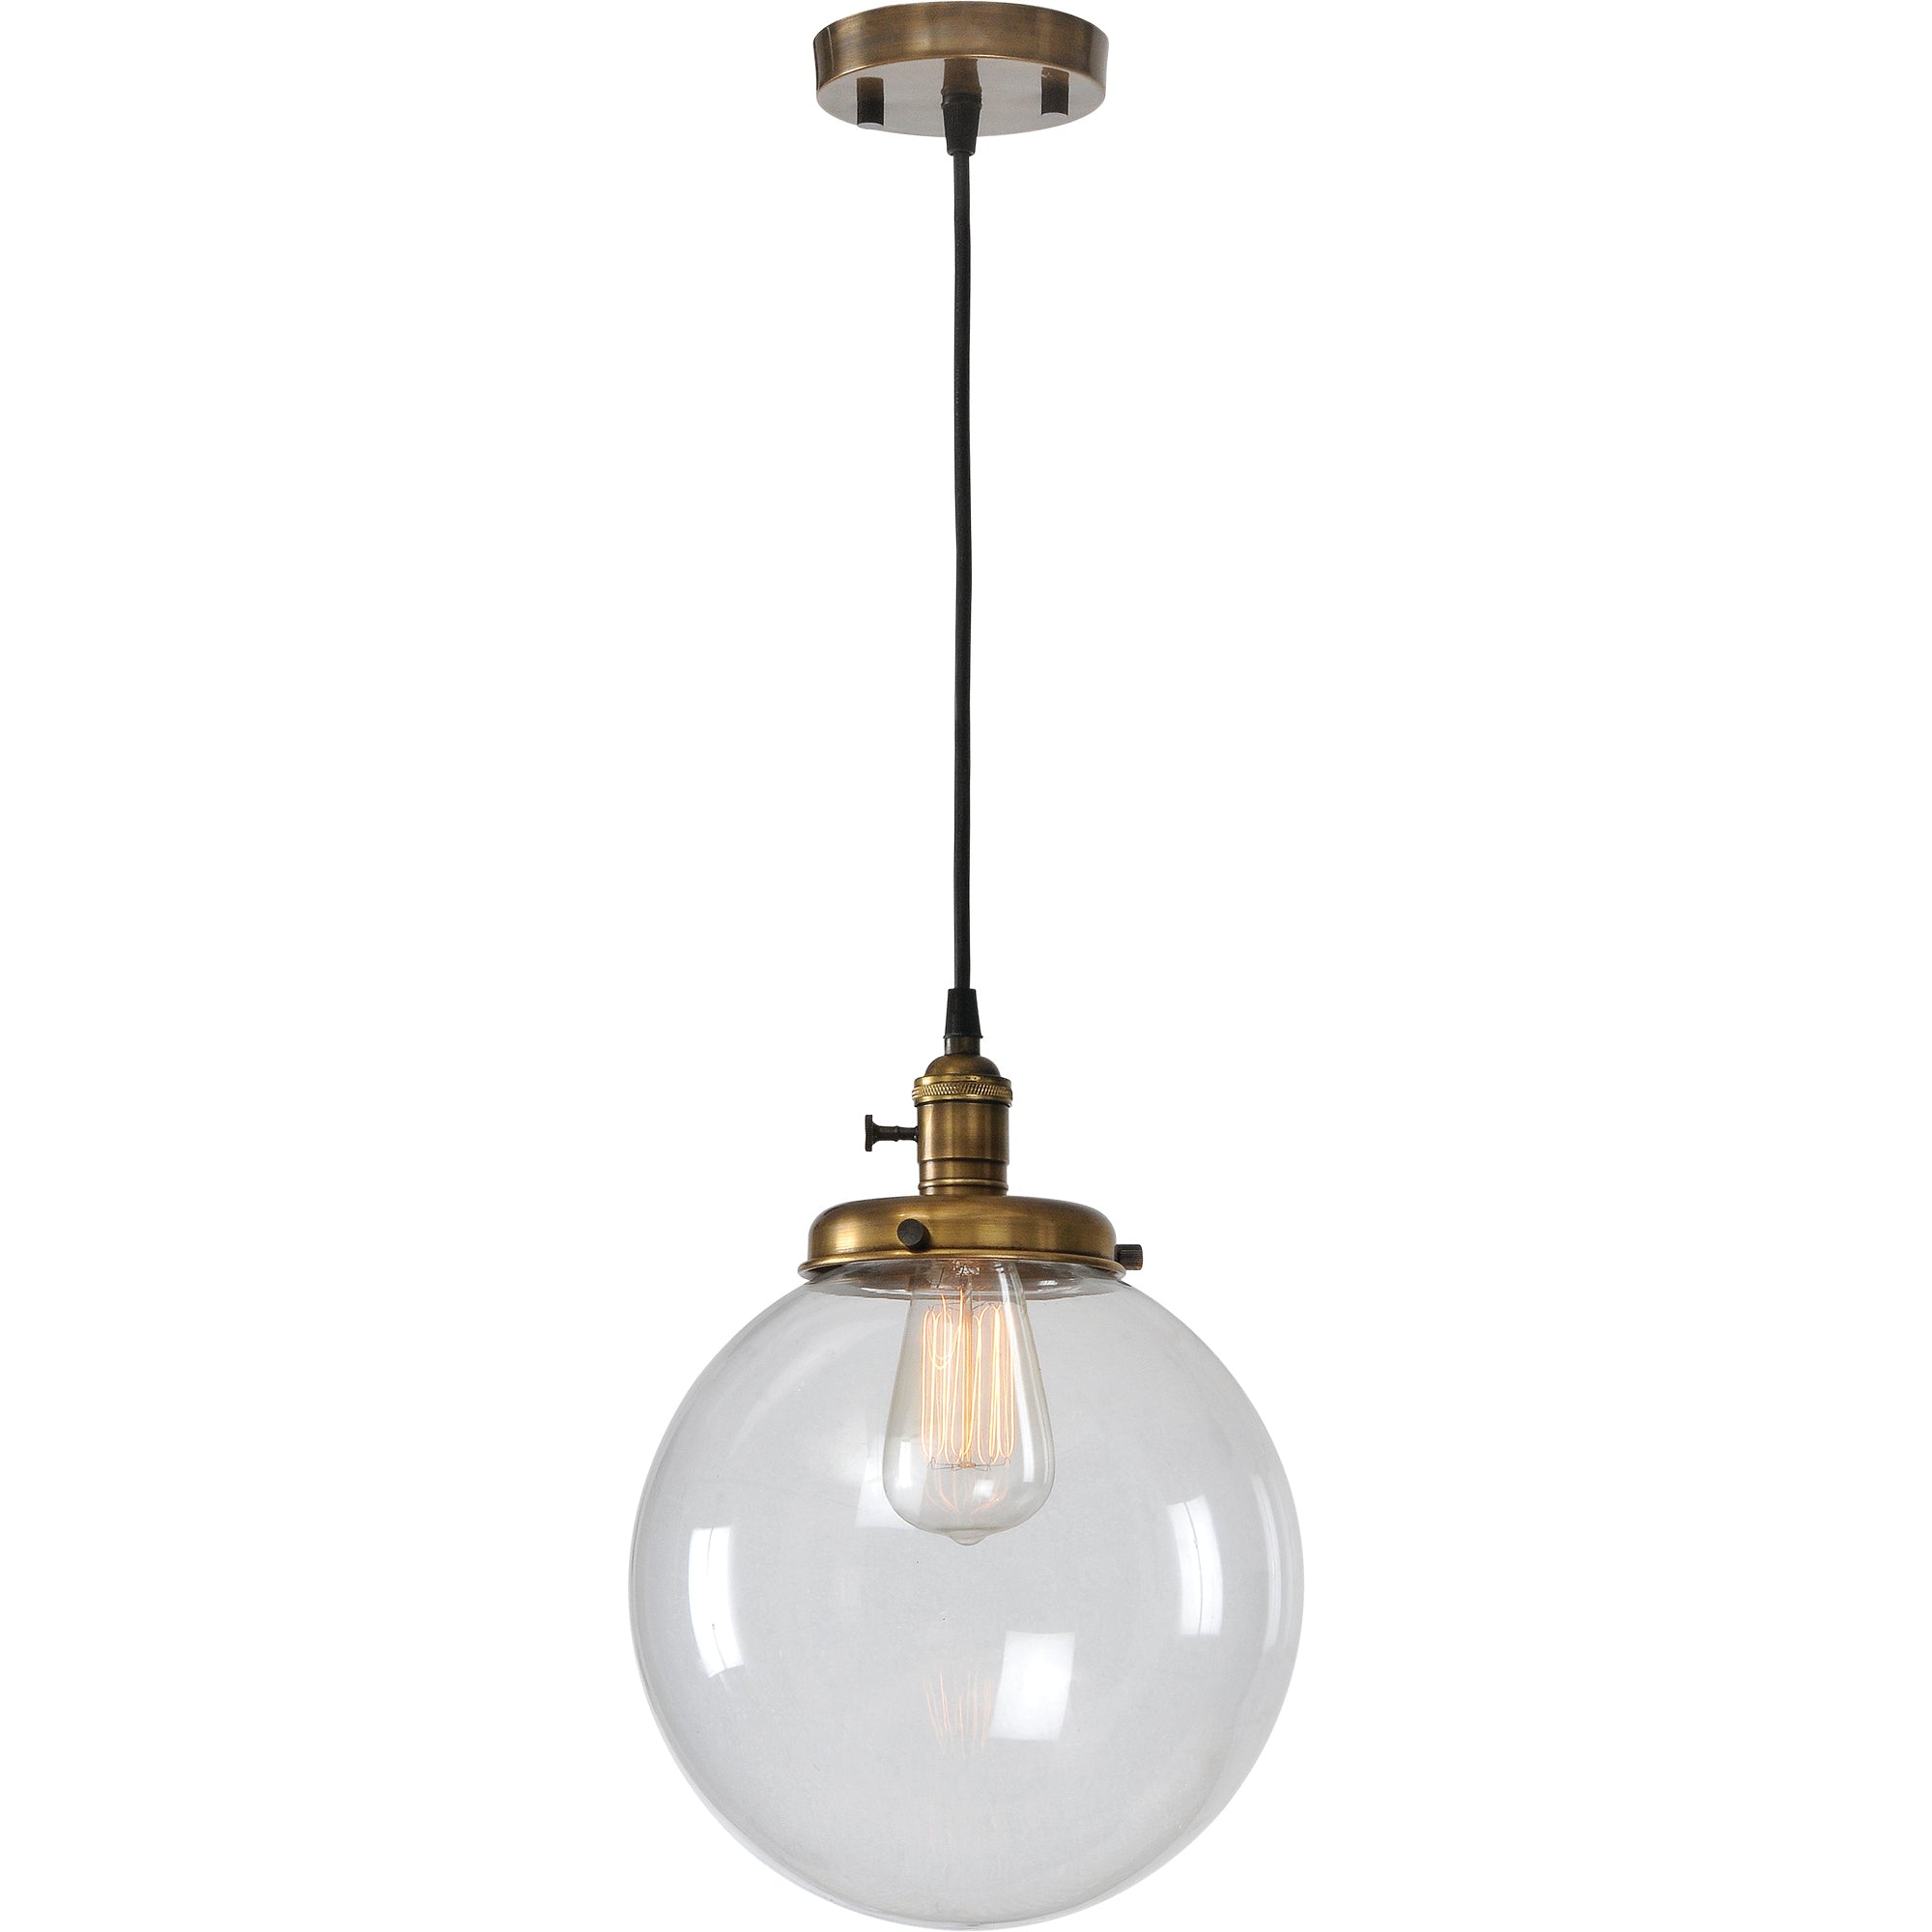 Antique Brass Pendant Light with Glass Shade